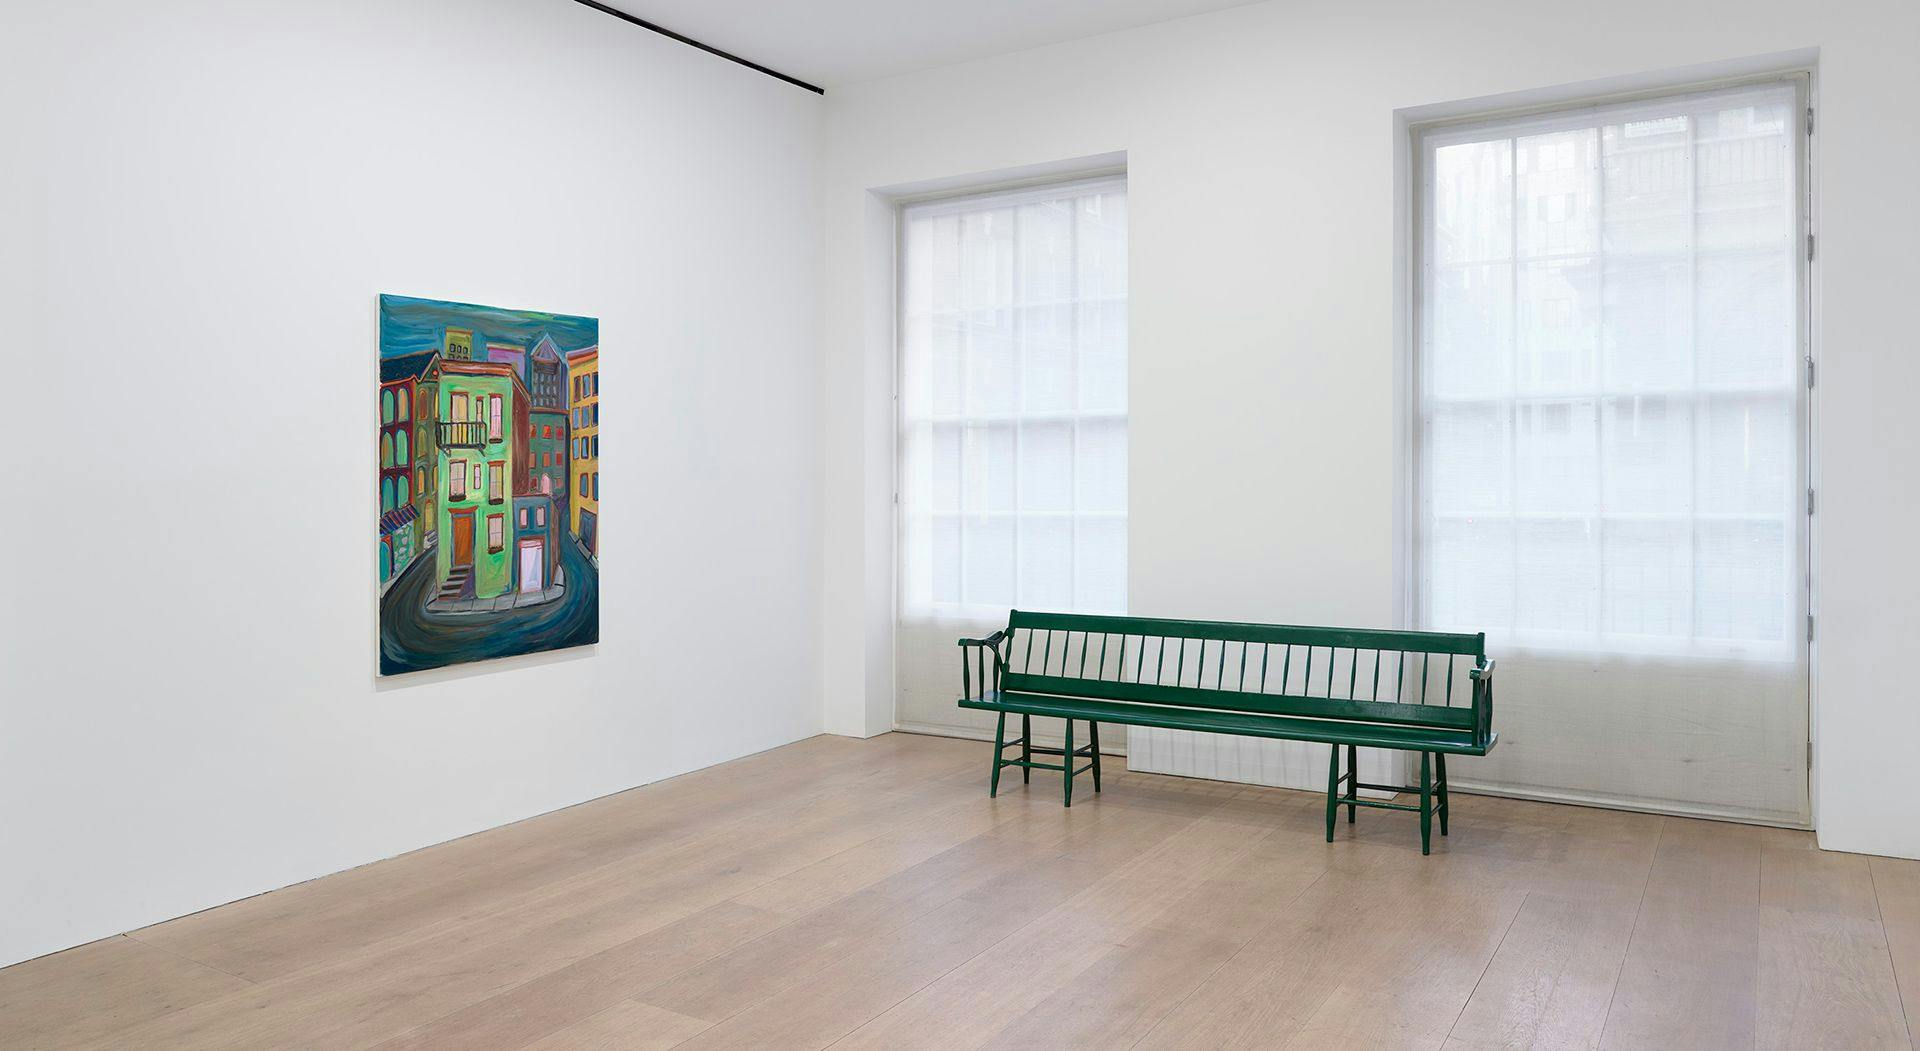 An installation view of the exhibition Josh Smith: Spectre at David Zwirner London, in 2020.